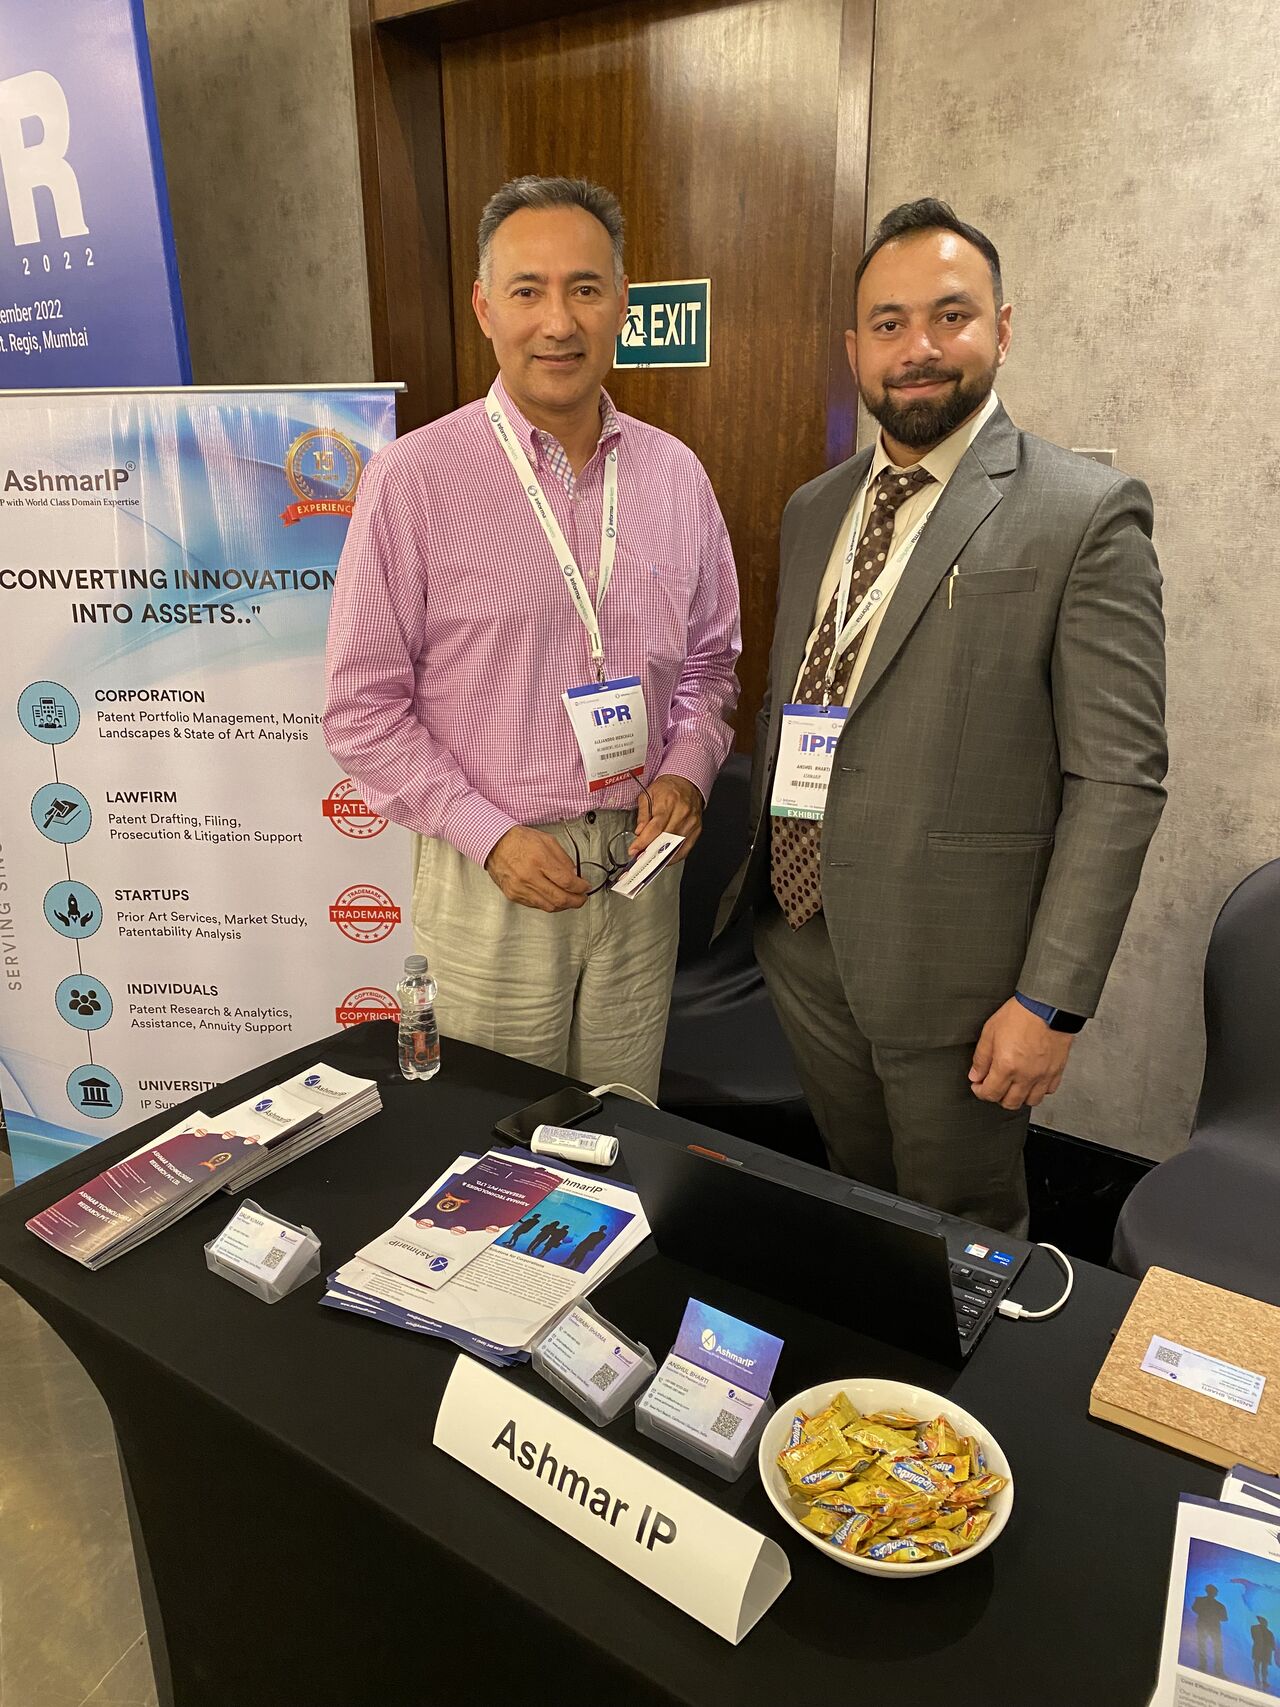 AshmarIP at 11th Annual Pharma IPR Conference